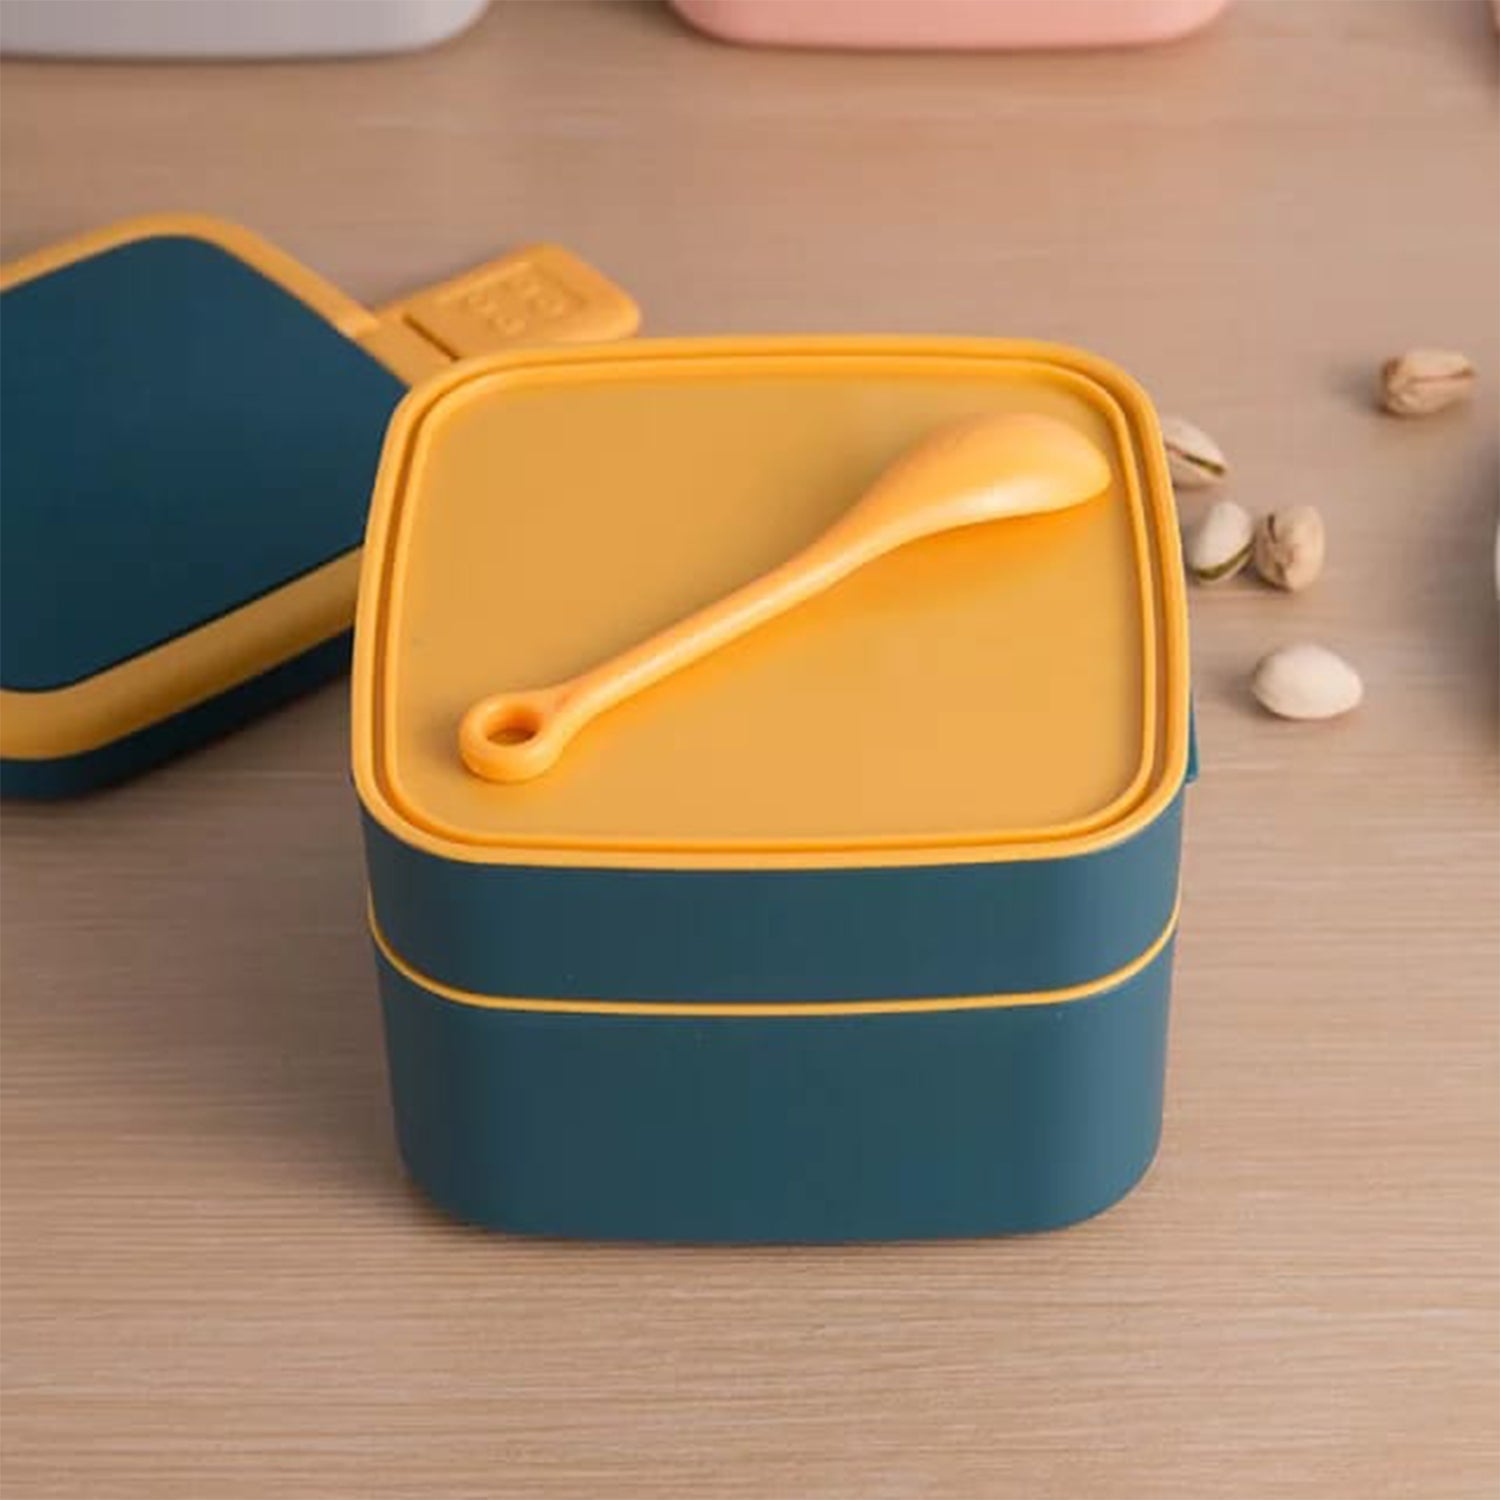 2838 Blue Double-Layer Portable Lunch Box Stackable with Carrying Handle and Spoon Lunch Box DeoDap